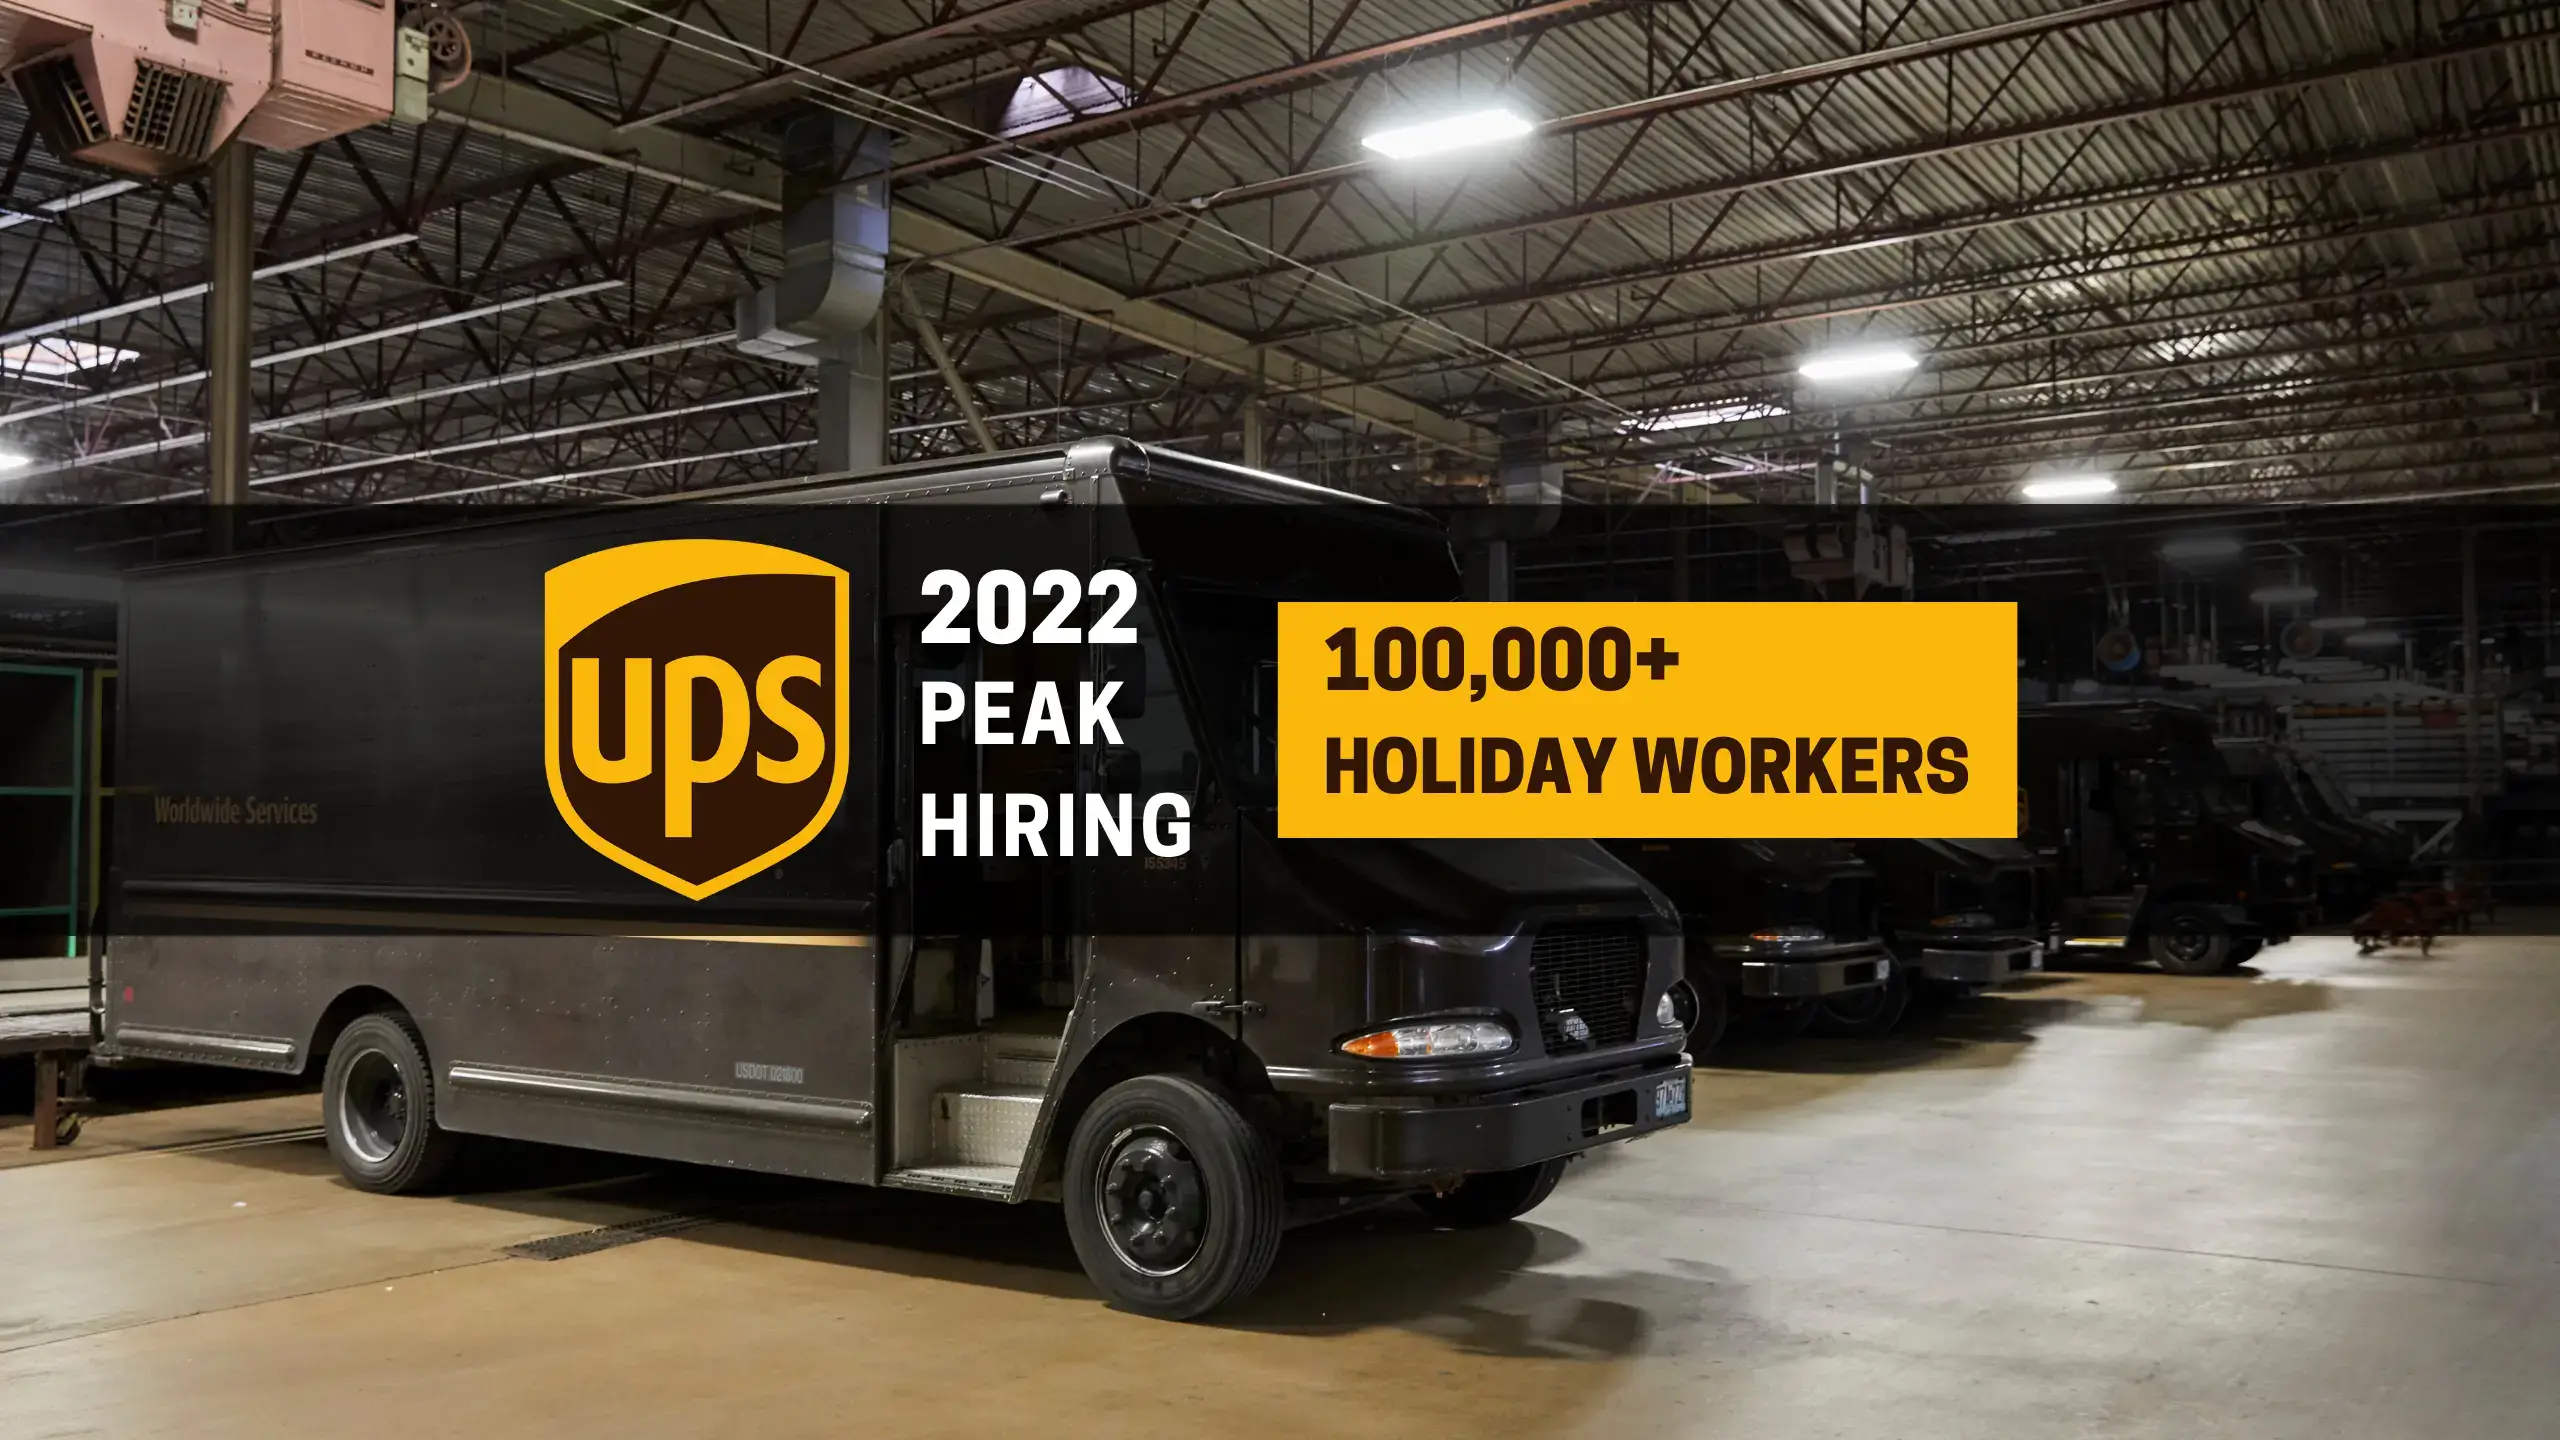 UPS Launching Holiday Hiring of 100,000+ Workers In 2022